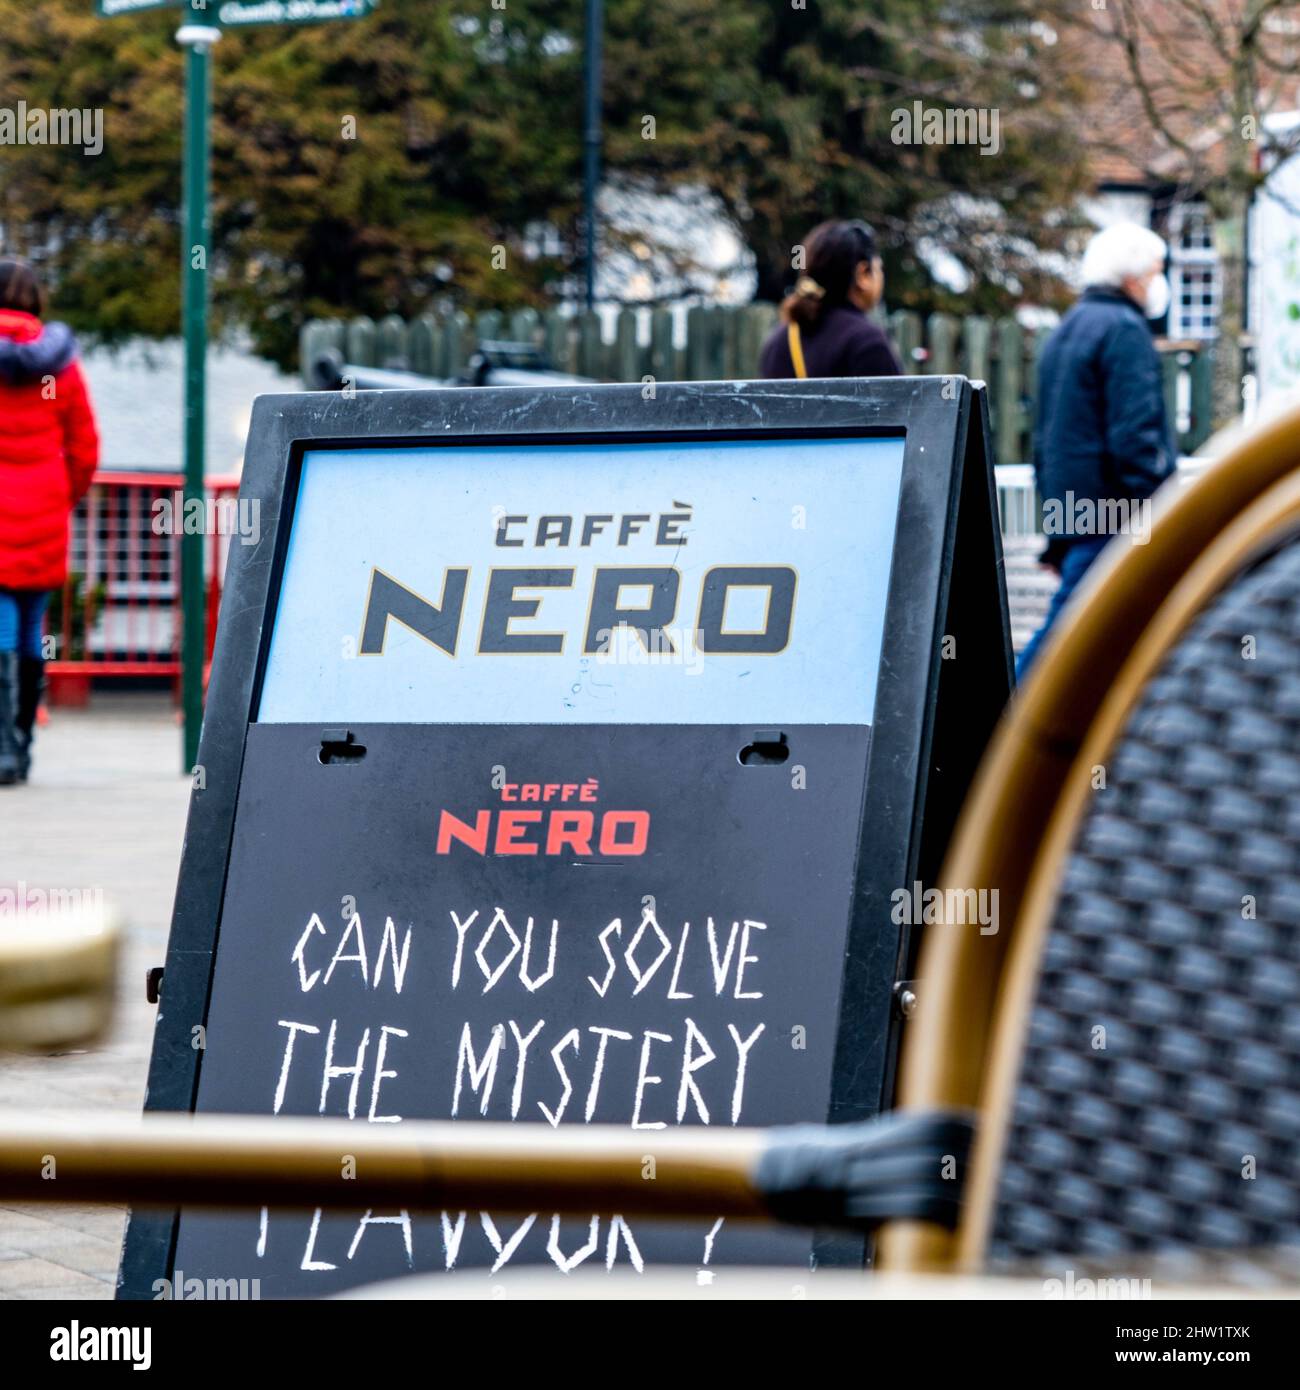 Epsom Surrey London UK, March 03 2022, People Walking Past A High Street Cafe Nero Coffee Shop Sign Board Stock Photo